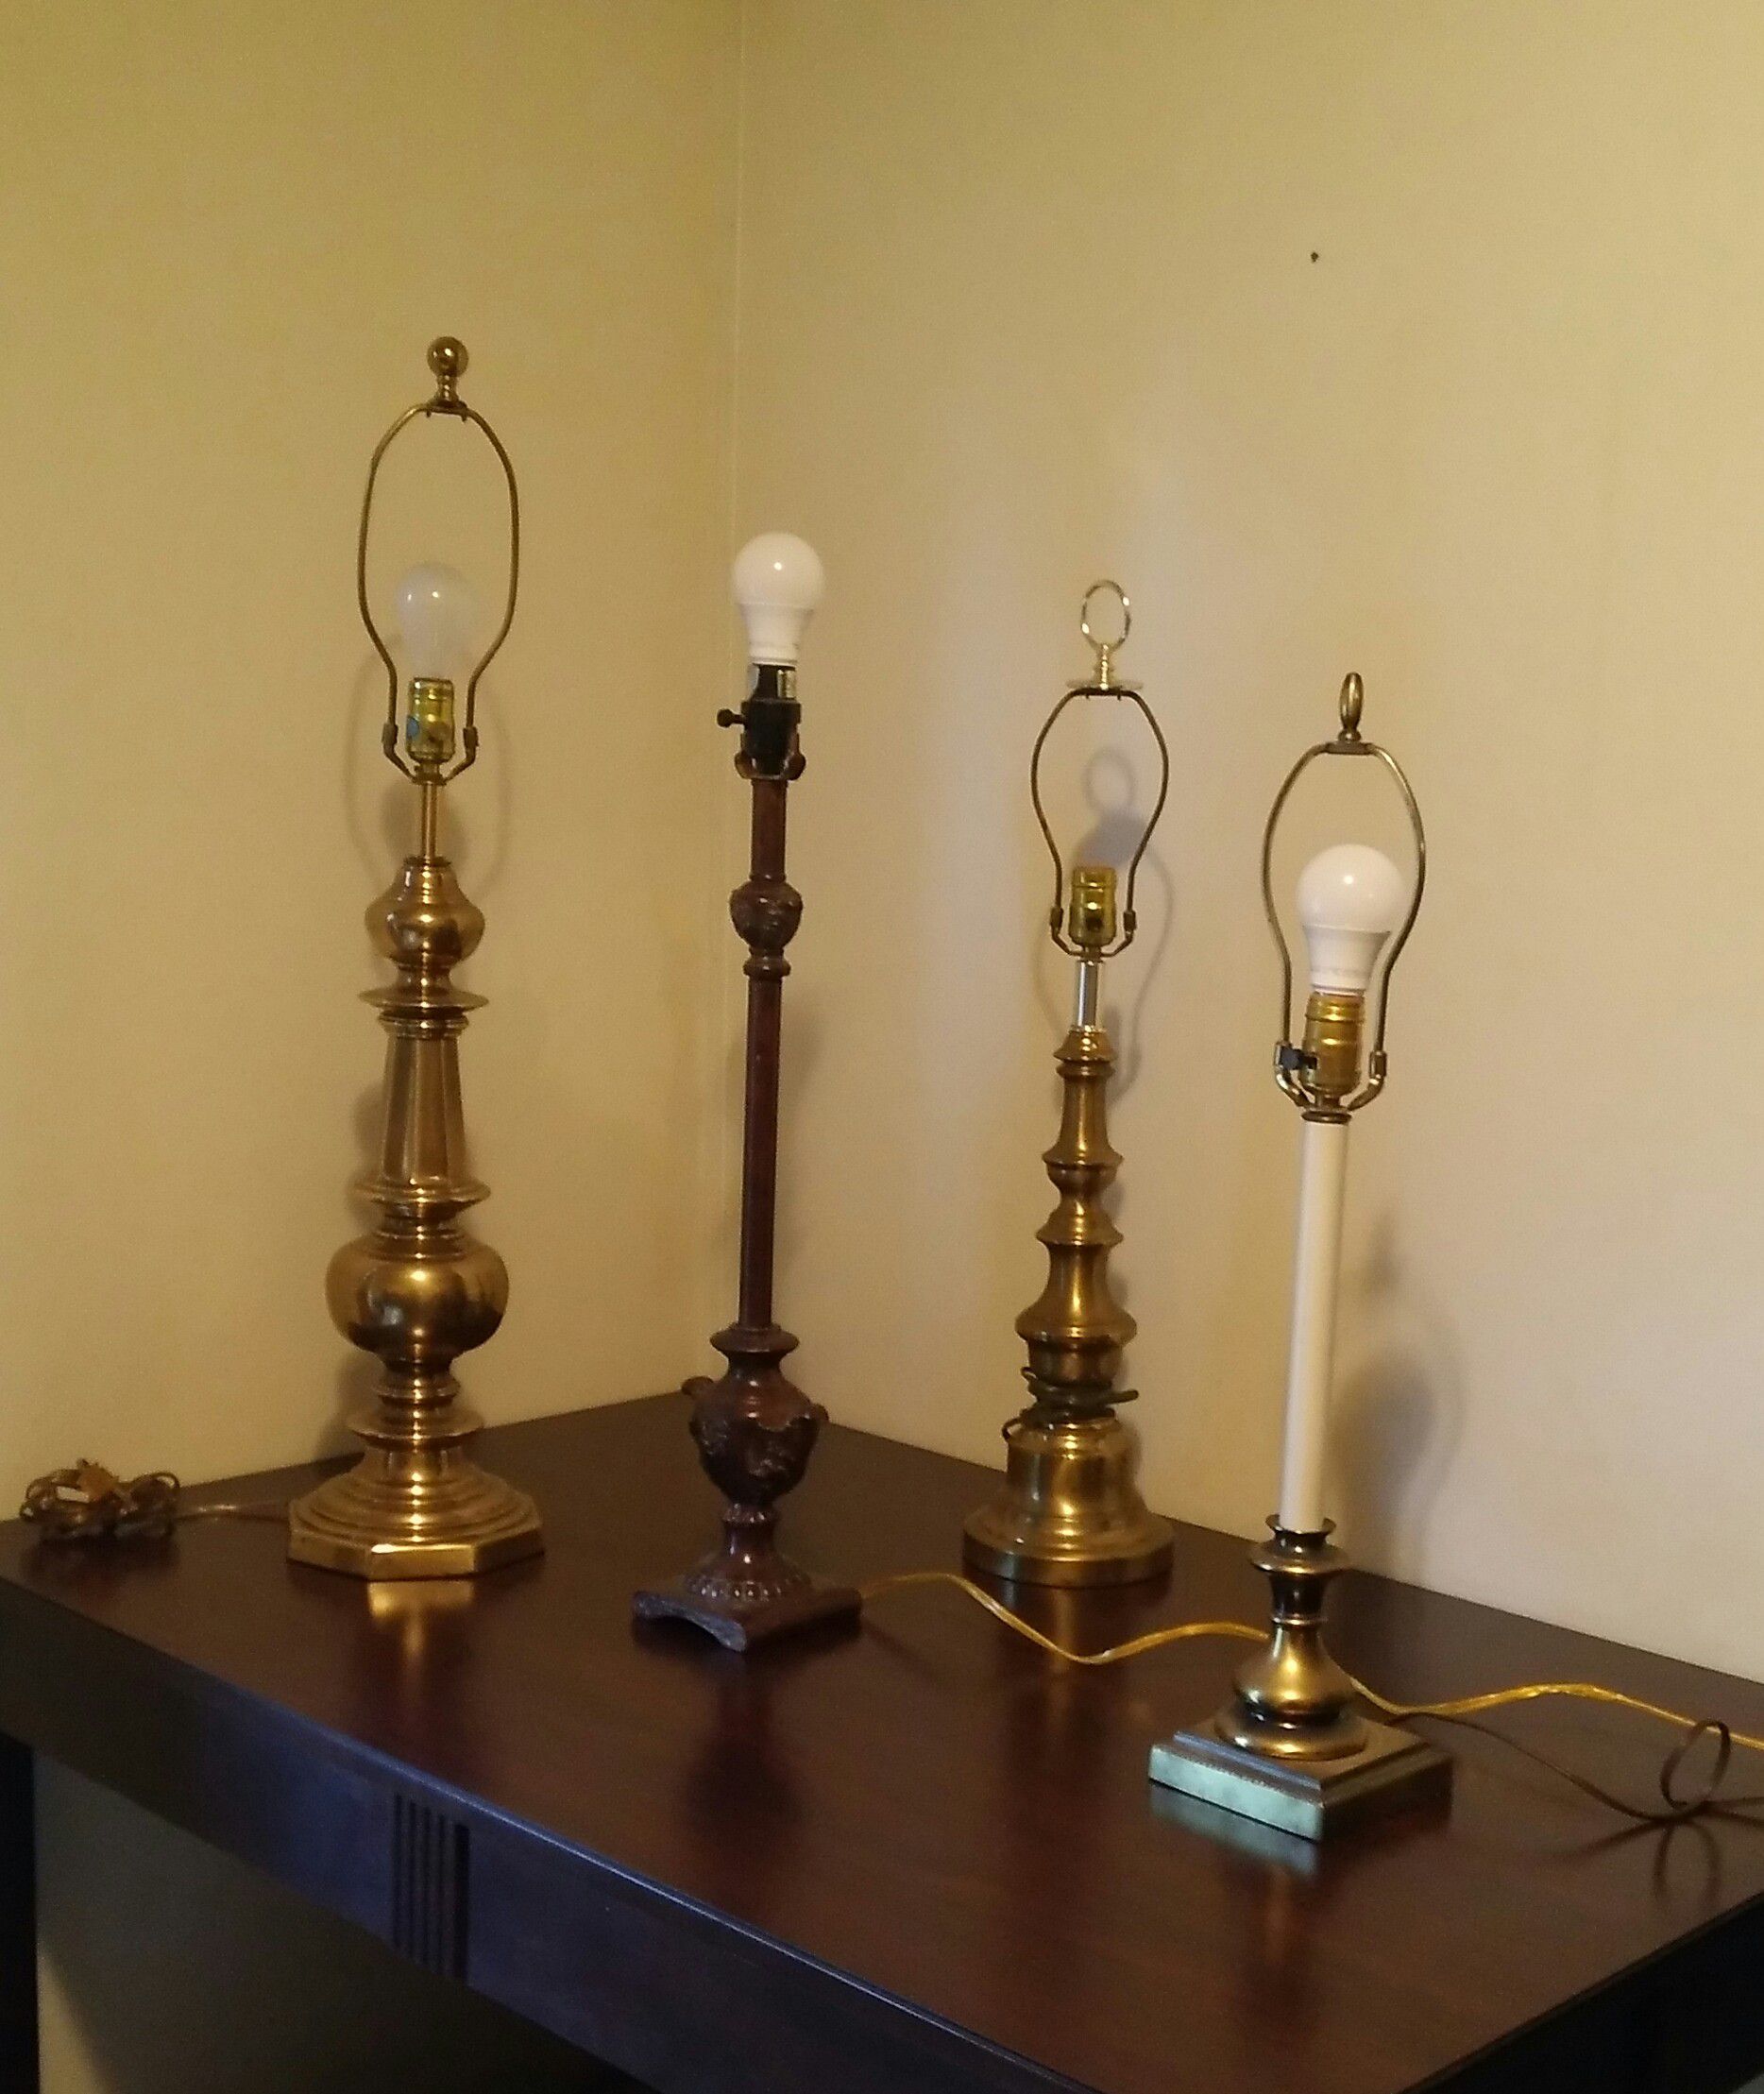 4 Lamps (All Work)